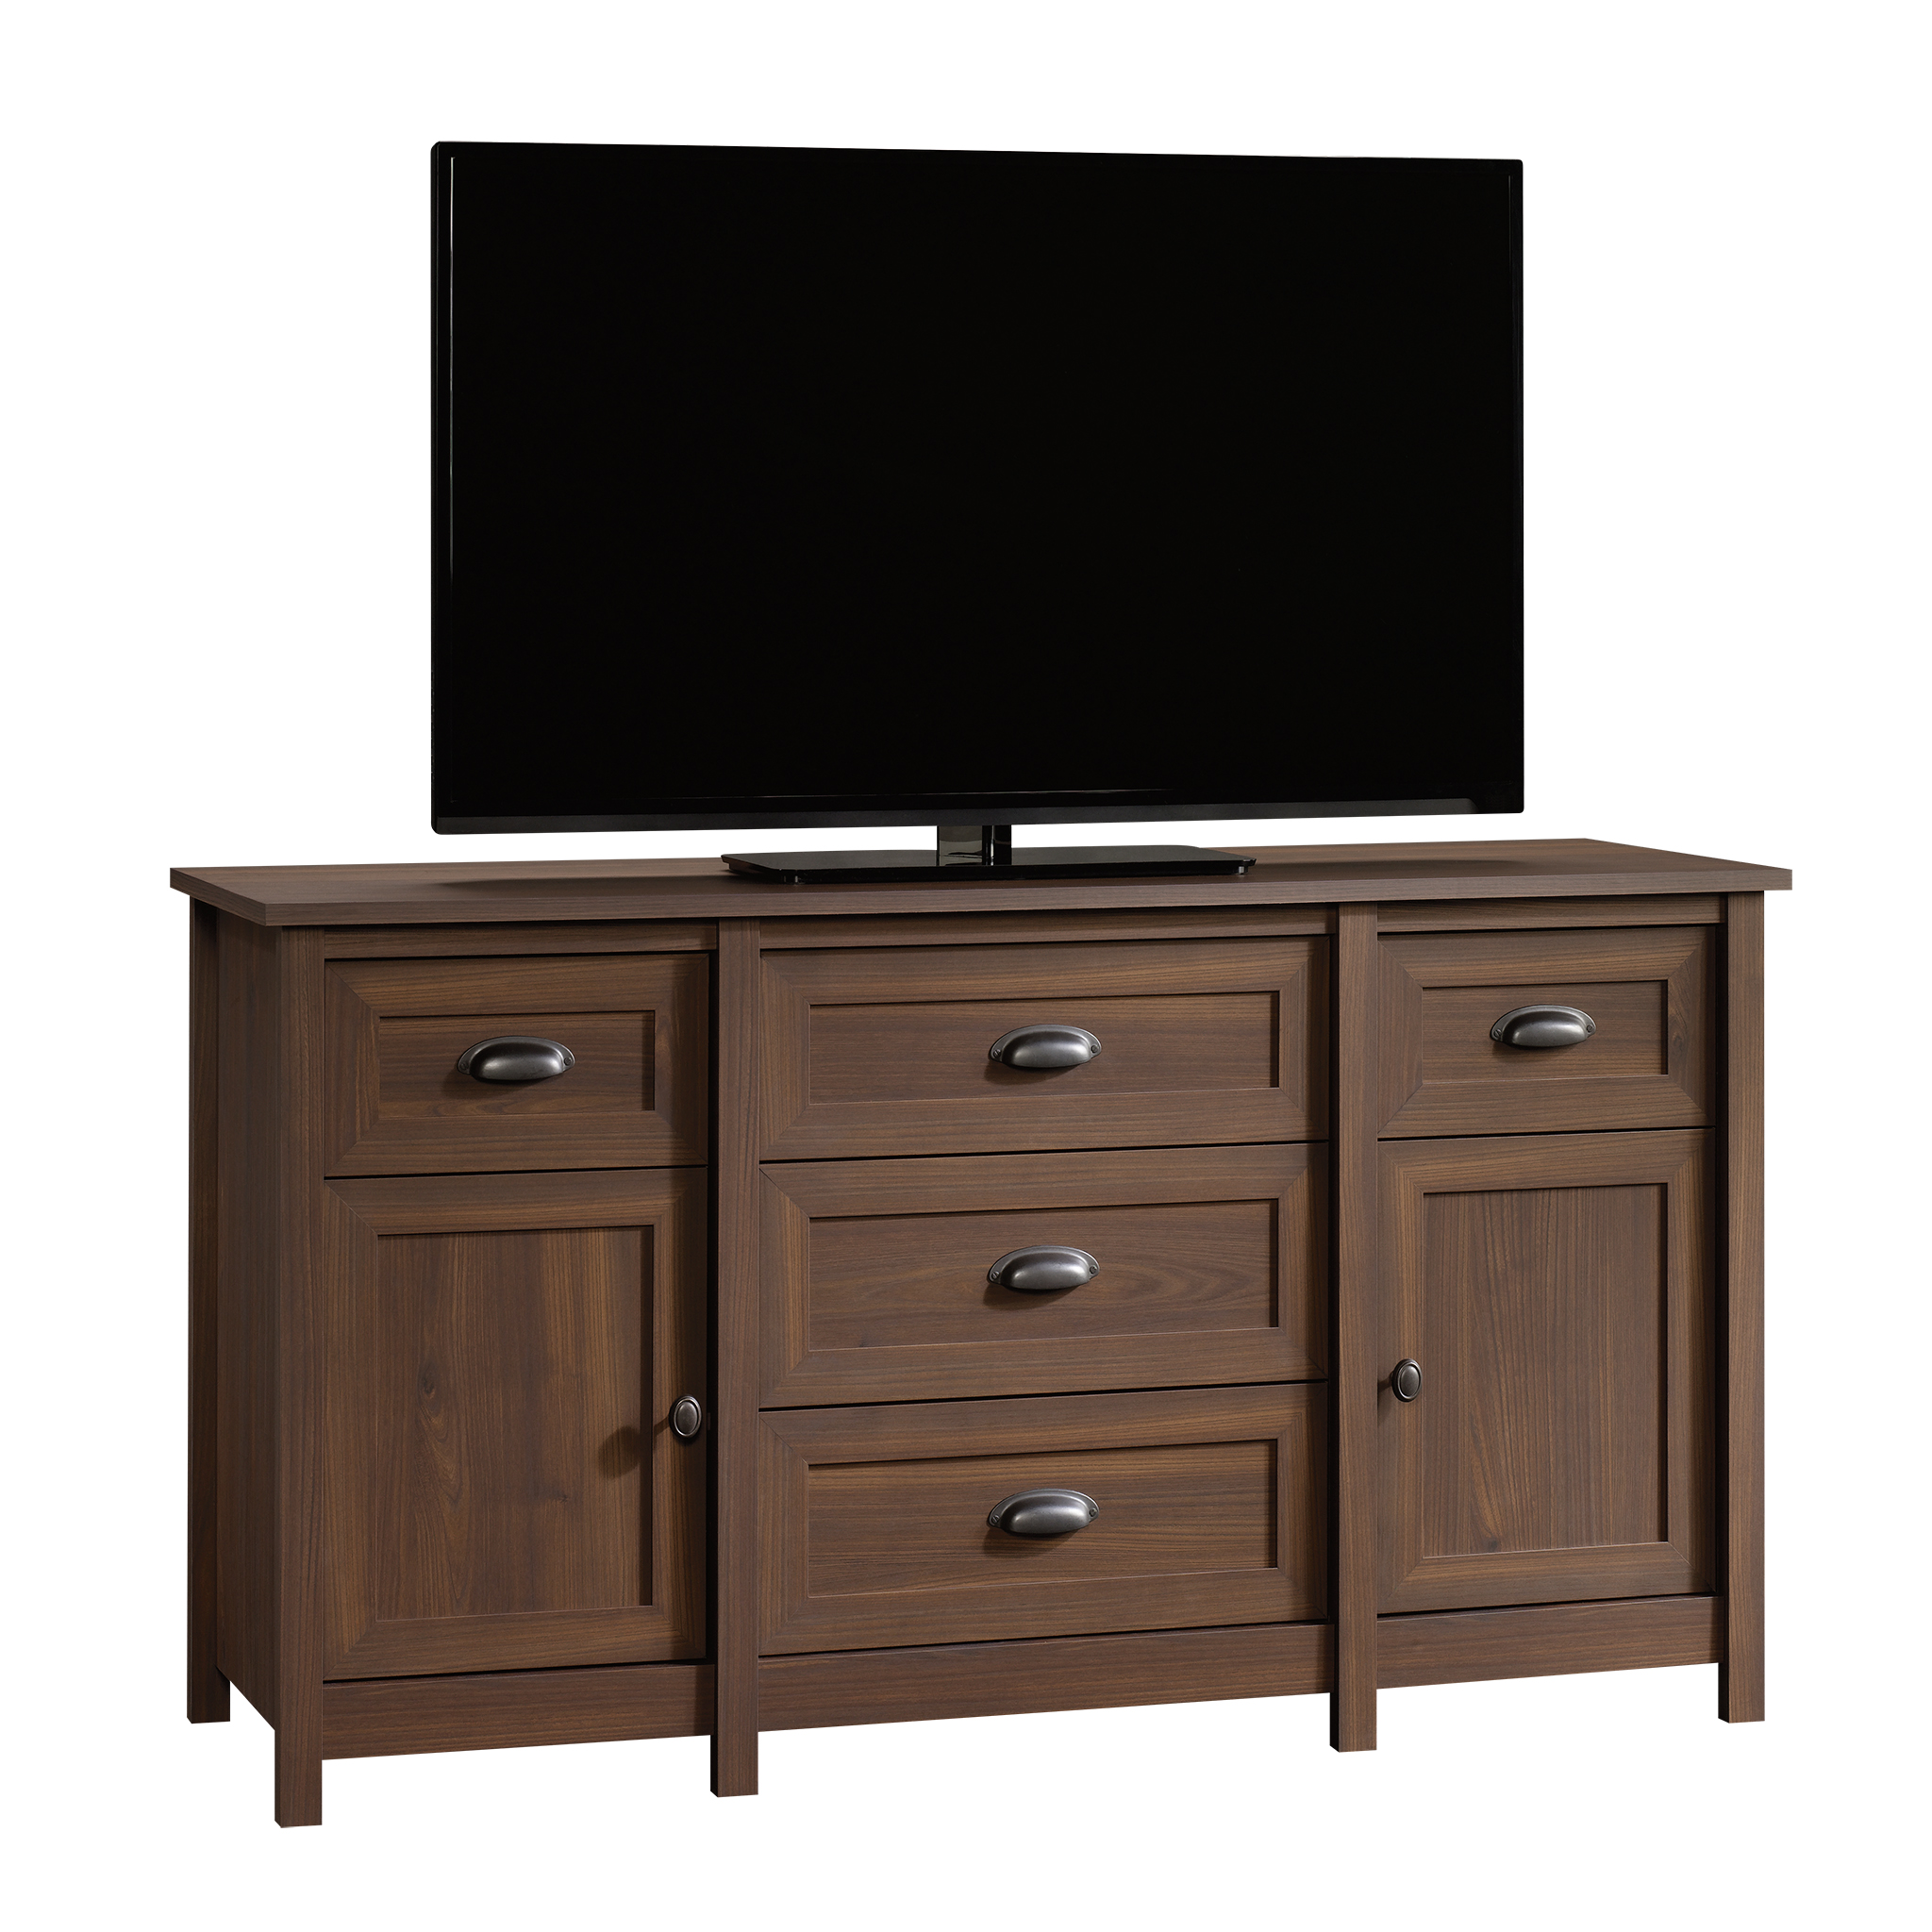 Better Homes & Gardens Lafayette TV Stand, for TVs up to 50", English Walnut Finish - image 1 of 10